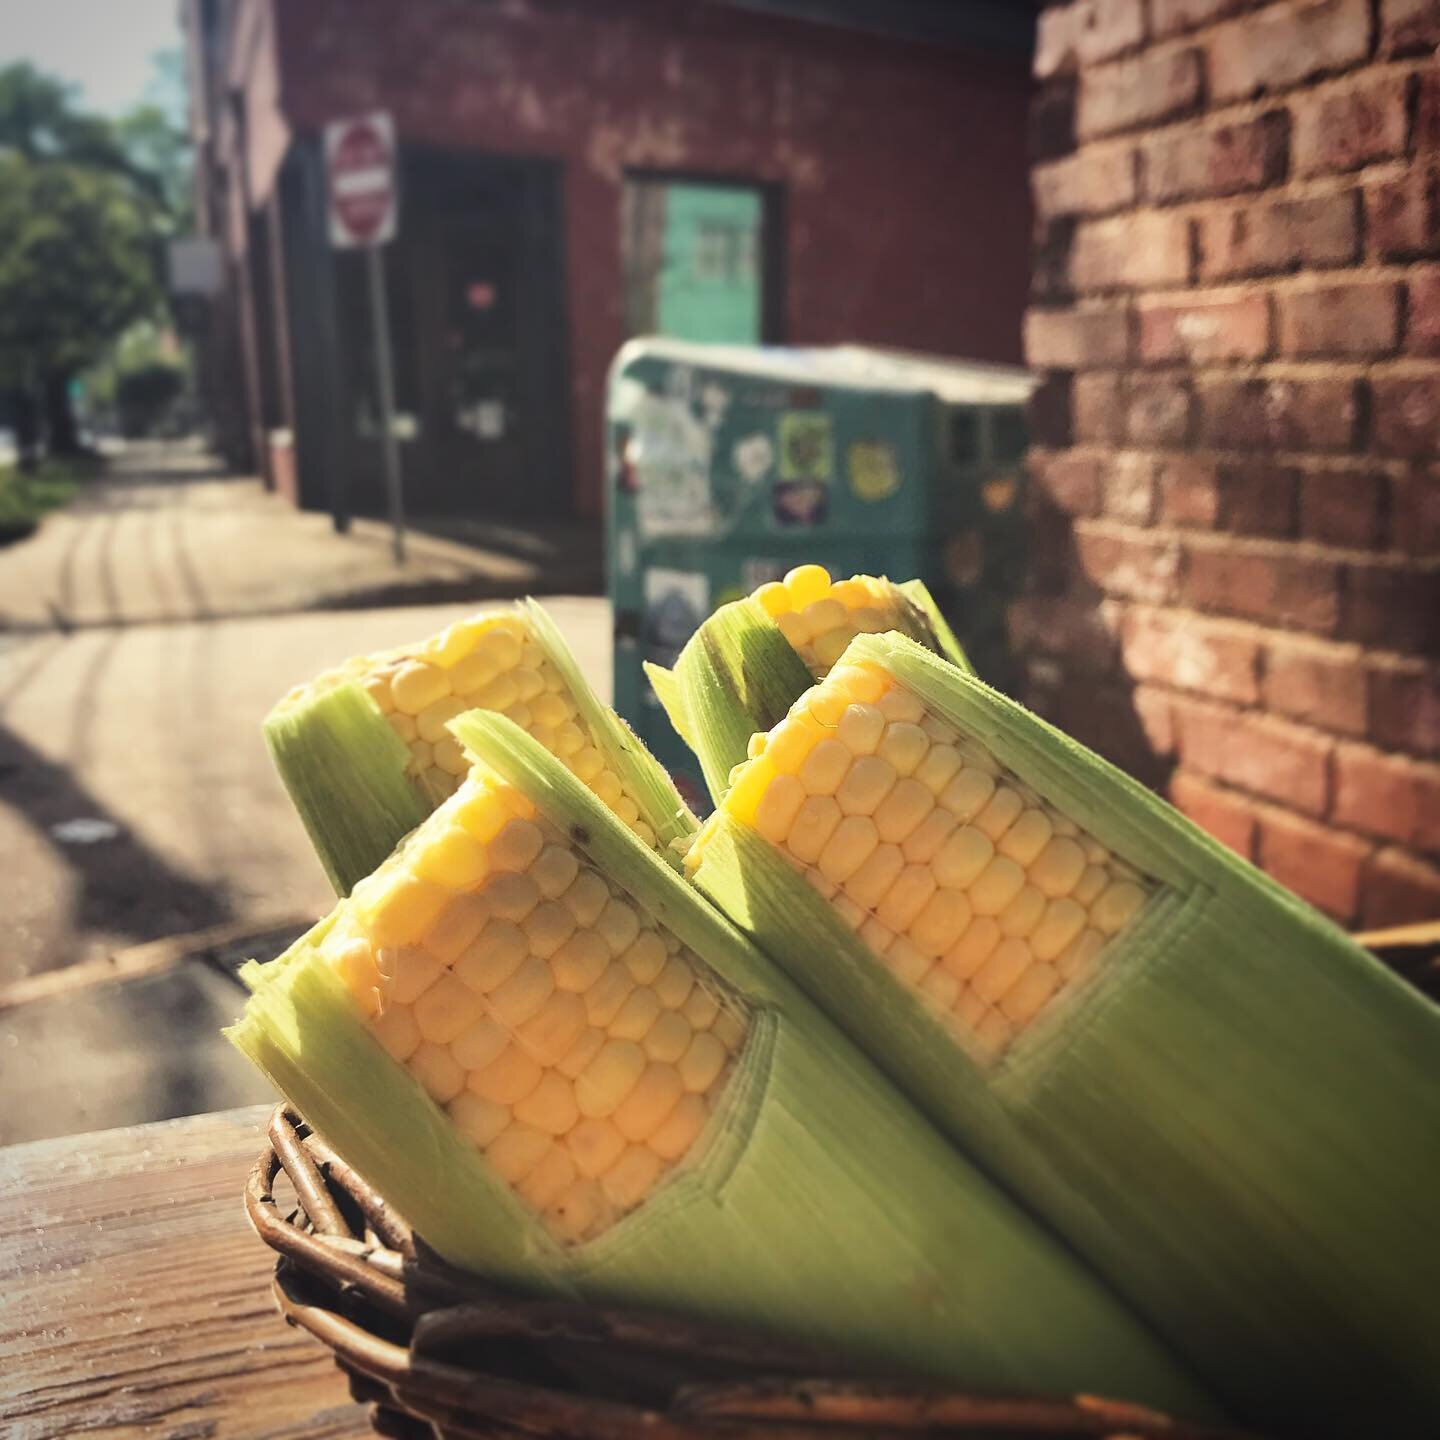 @dailycoop has local corn 🌽 available from Jubilee Farms! #supportlocal #eatdaily #corn